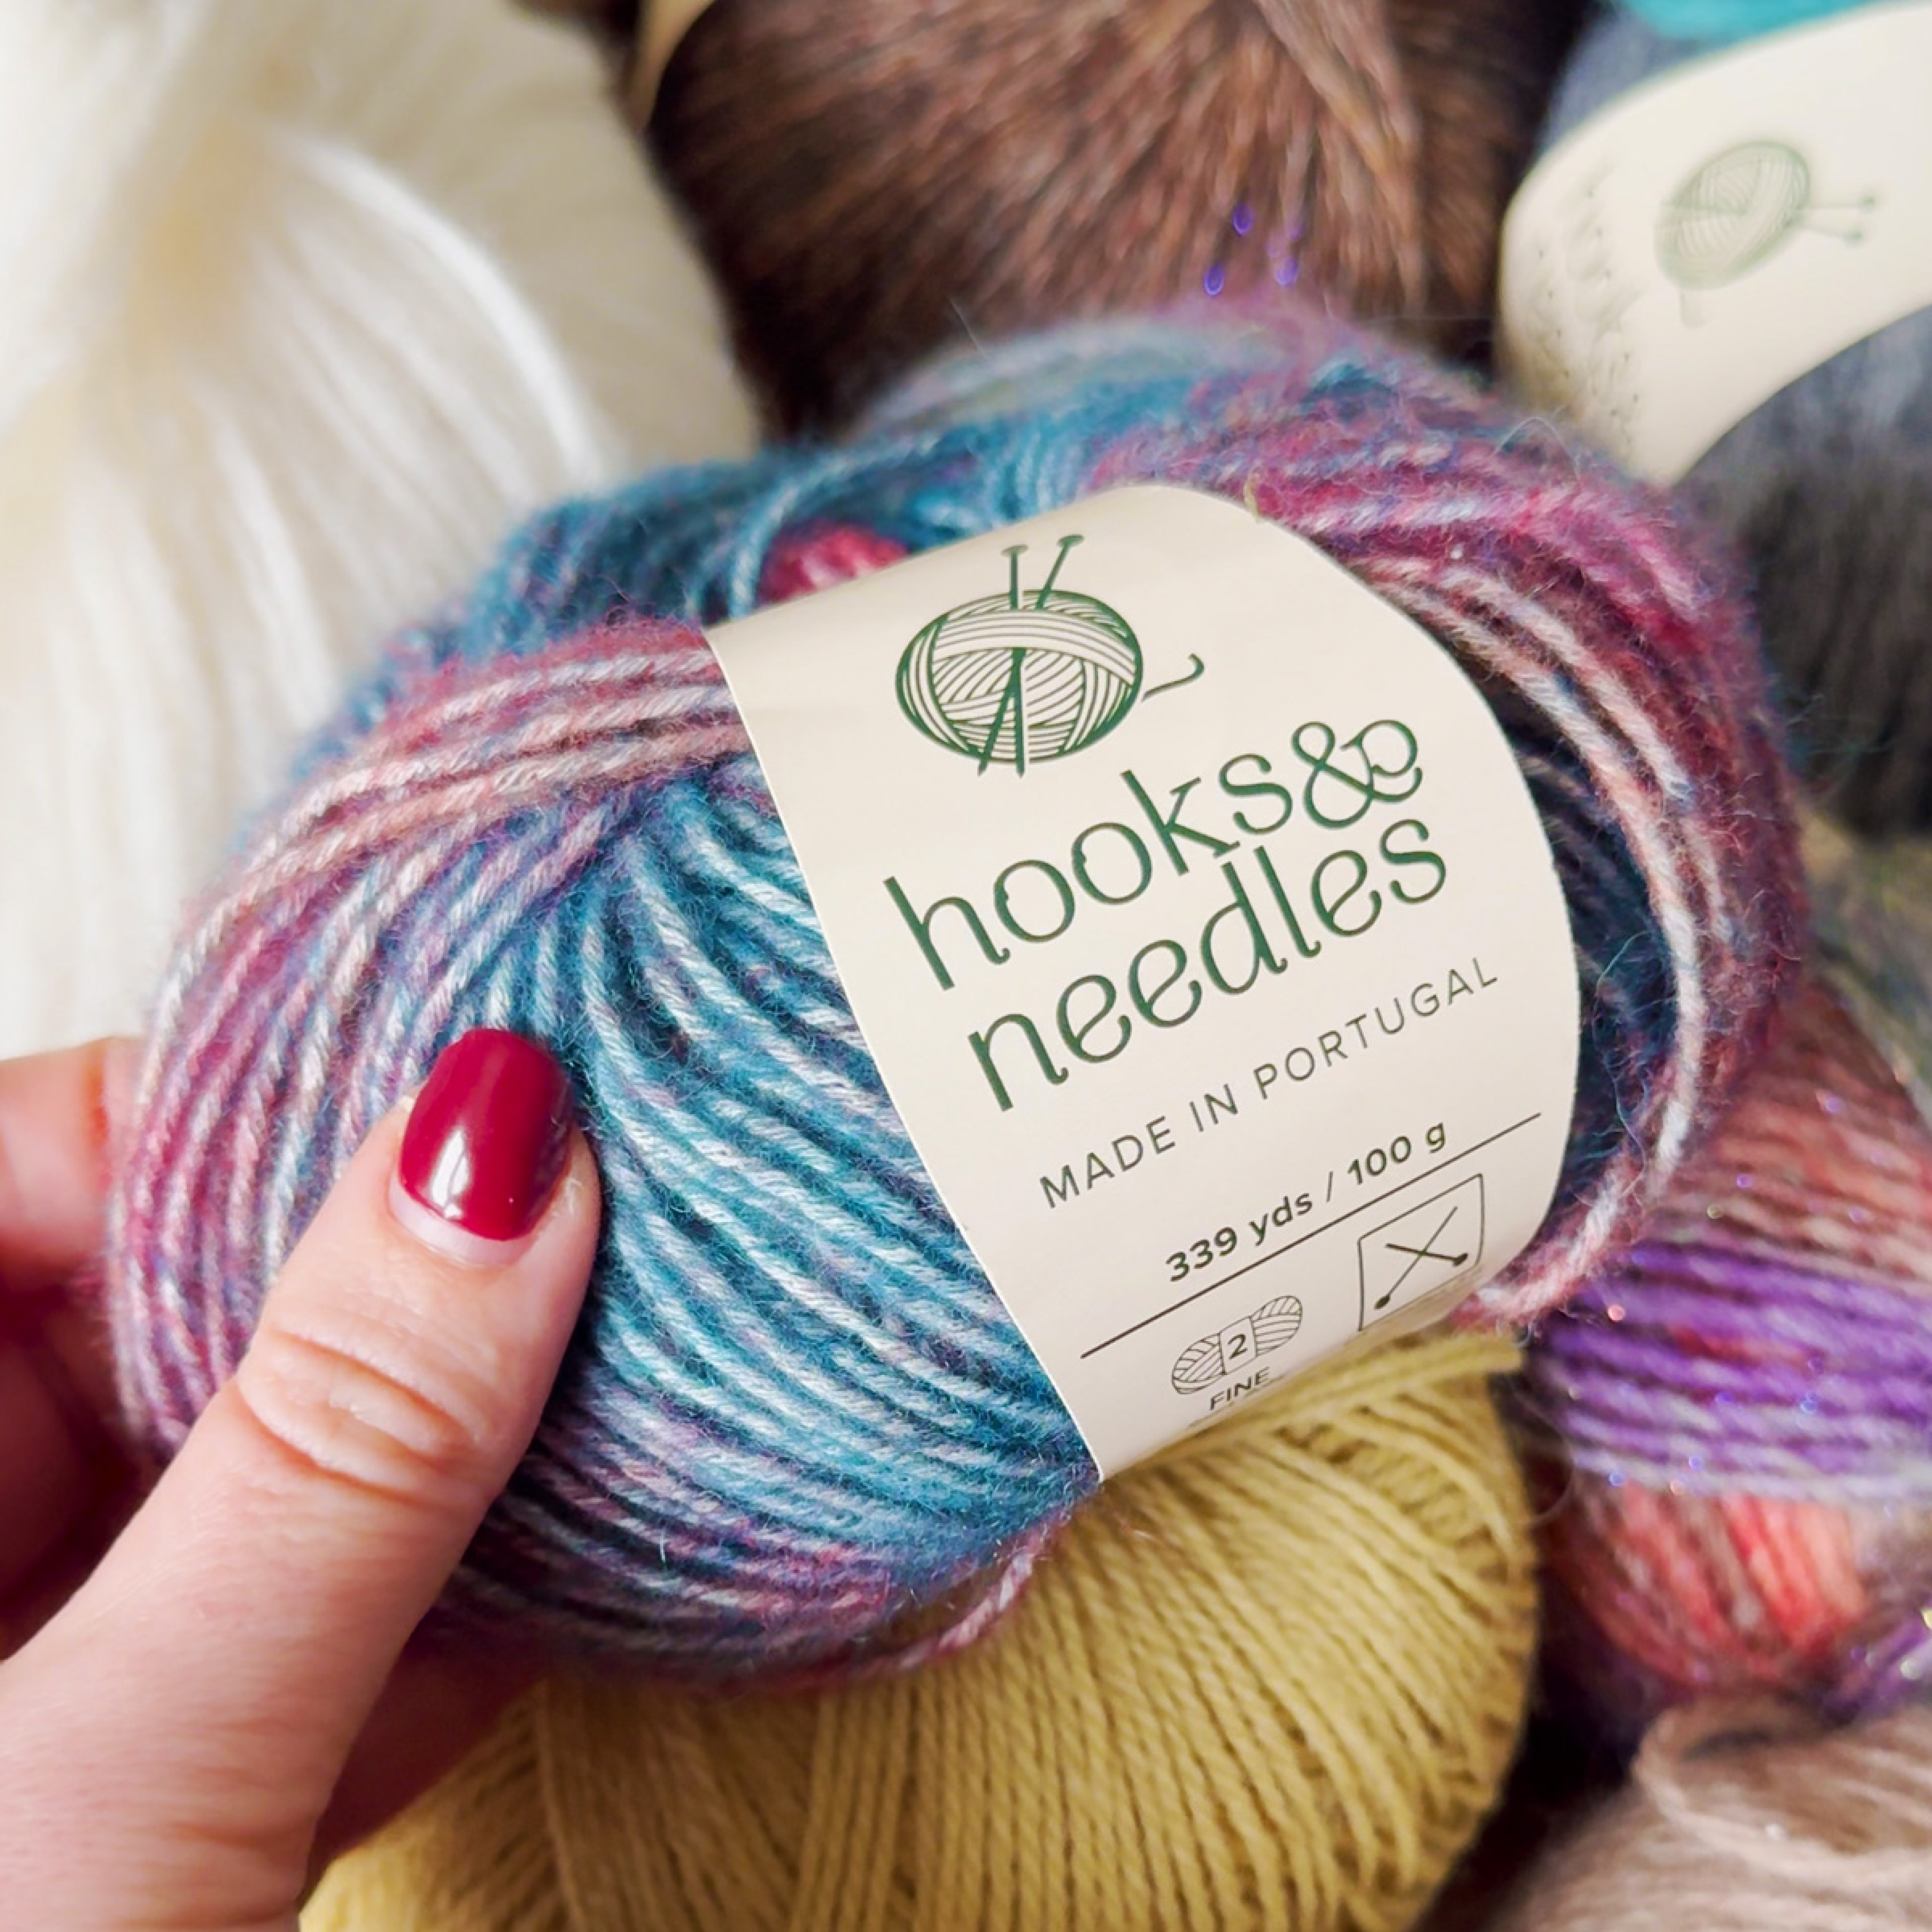 A hand holding a skein of multicolored yarn labeled "6-Month-Prepaid Hooks & Needles Subscription Box #13, made in Portugal" amidst other yarns.